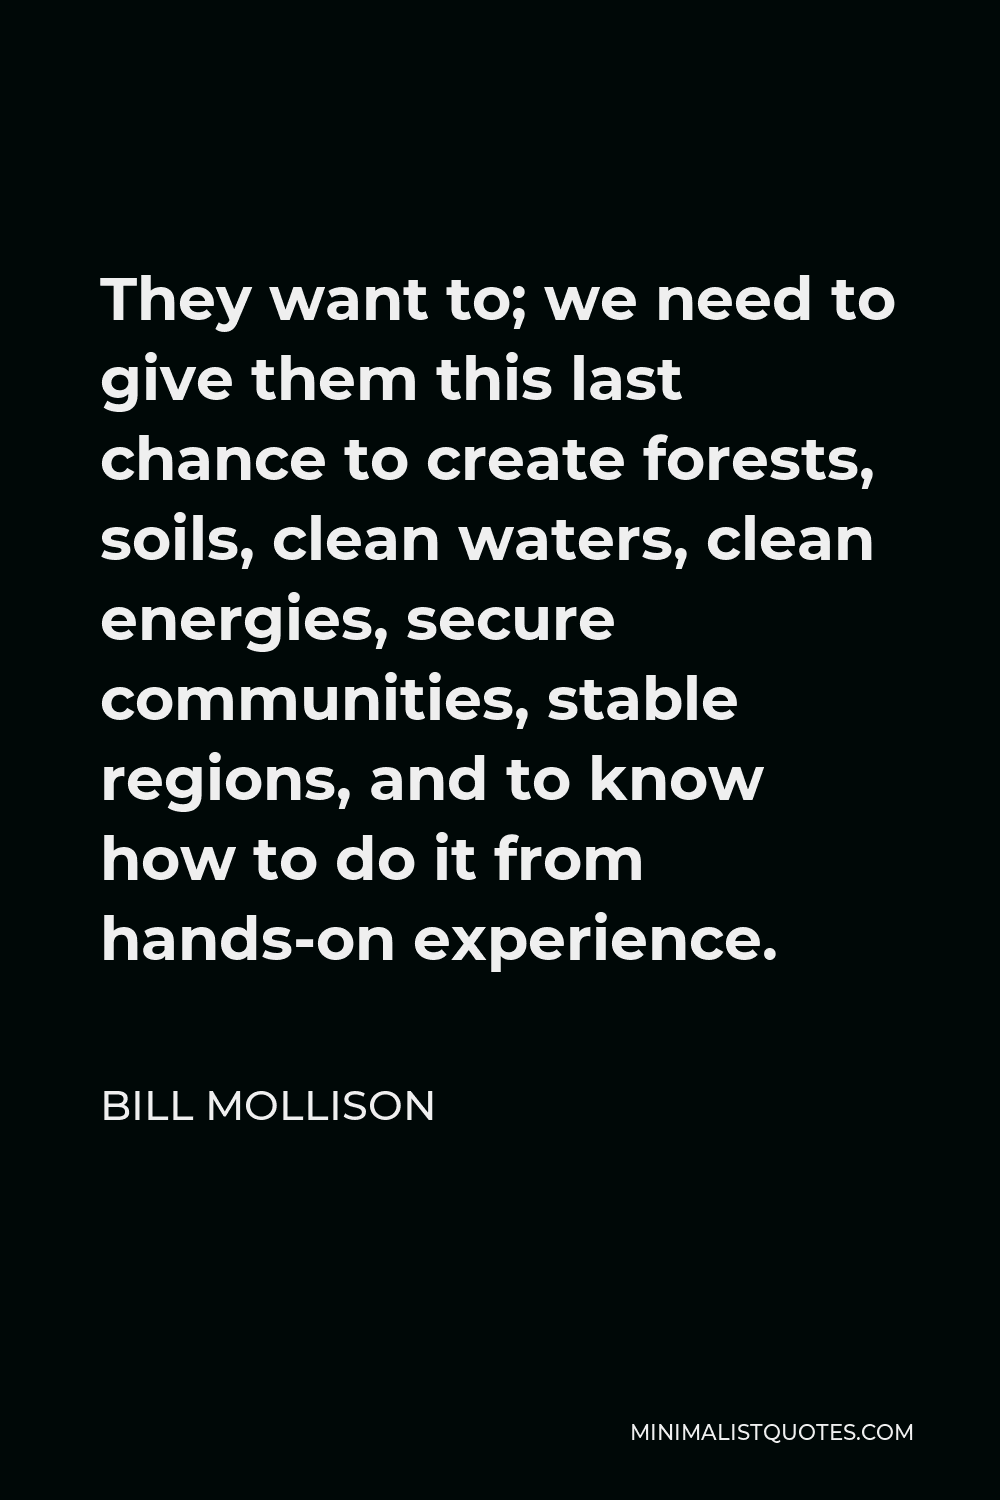 Bill Mollison Quote - They want to; we need to give them this last chance to create forests, soils, clean waters, clean energies, secure communities, stable regions, and to know how to do it from hands-on experience.